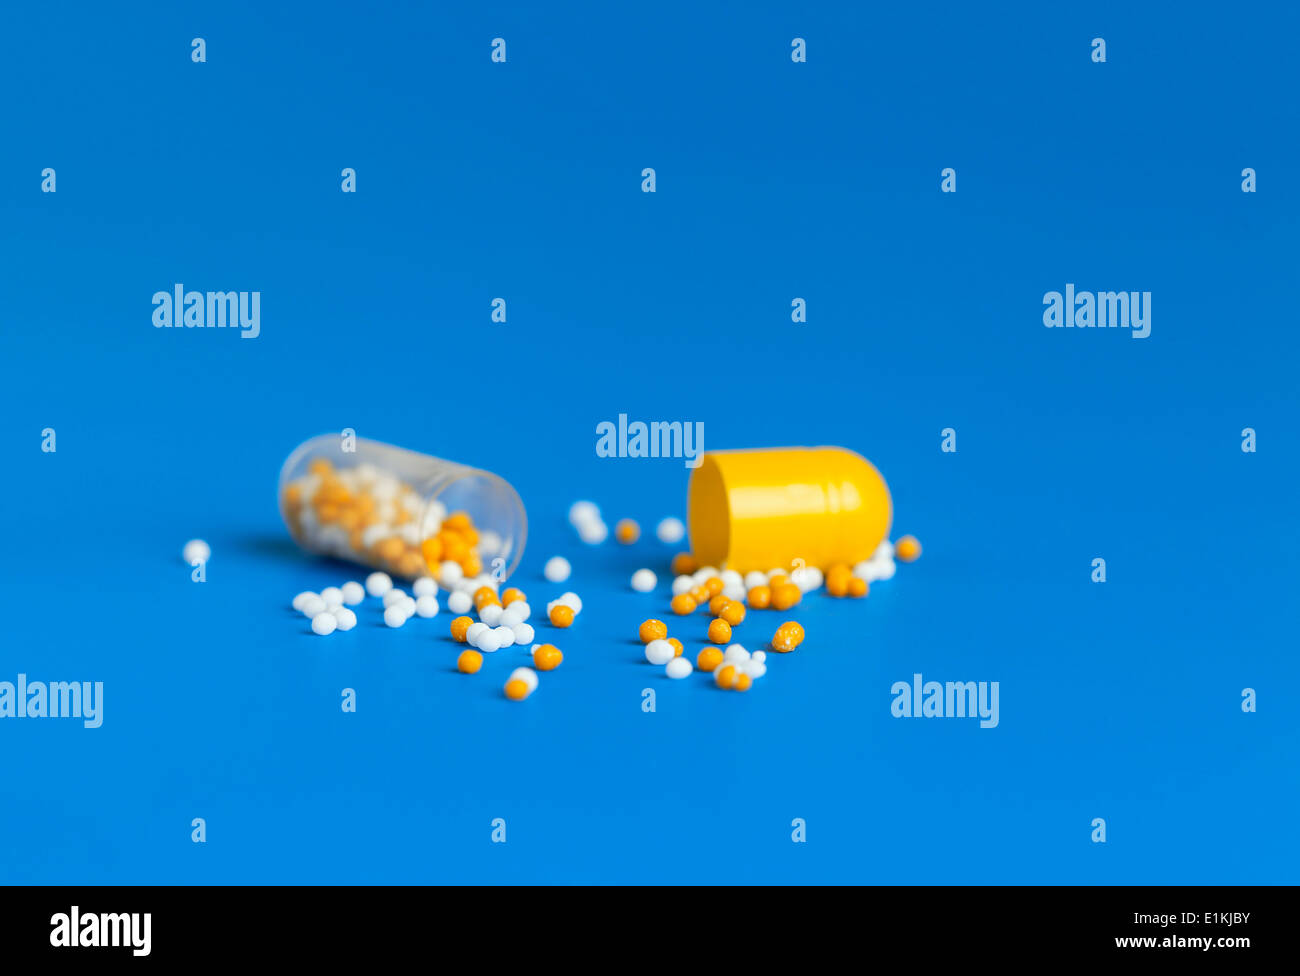 Medicine capsule broken in half with contents spilling out. Stock Photo